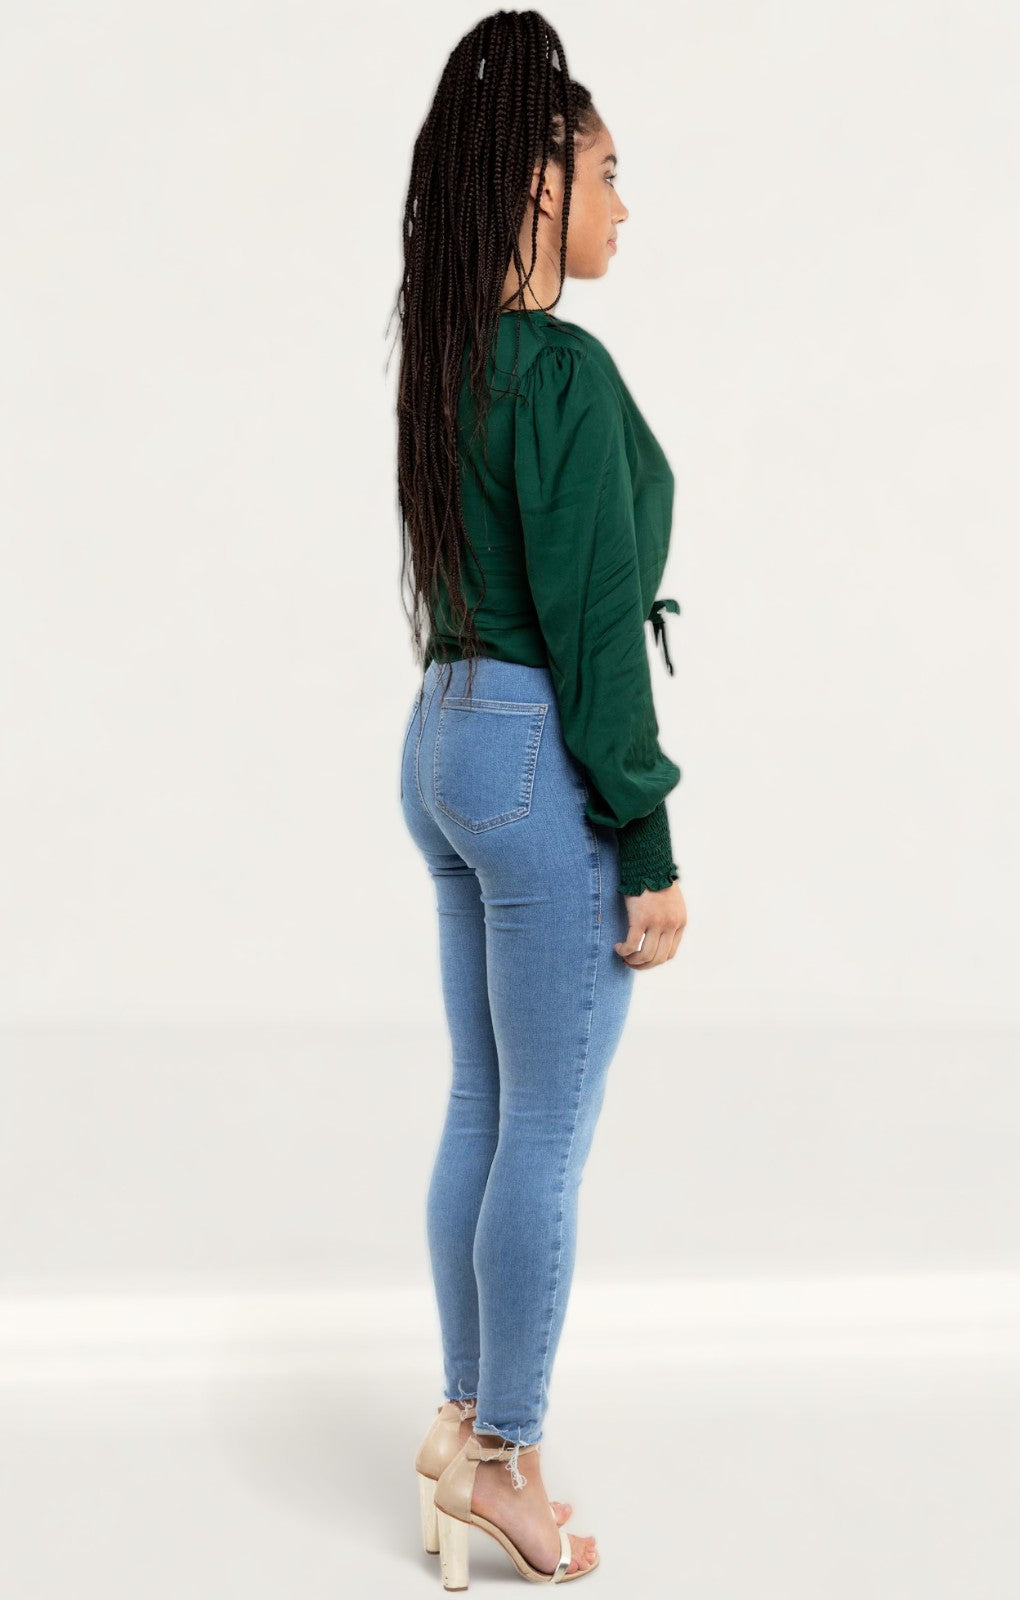 Zara Green Satin Blouse With Knot Detail product image